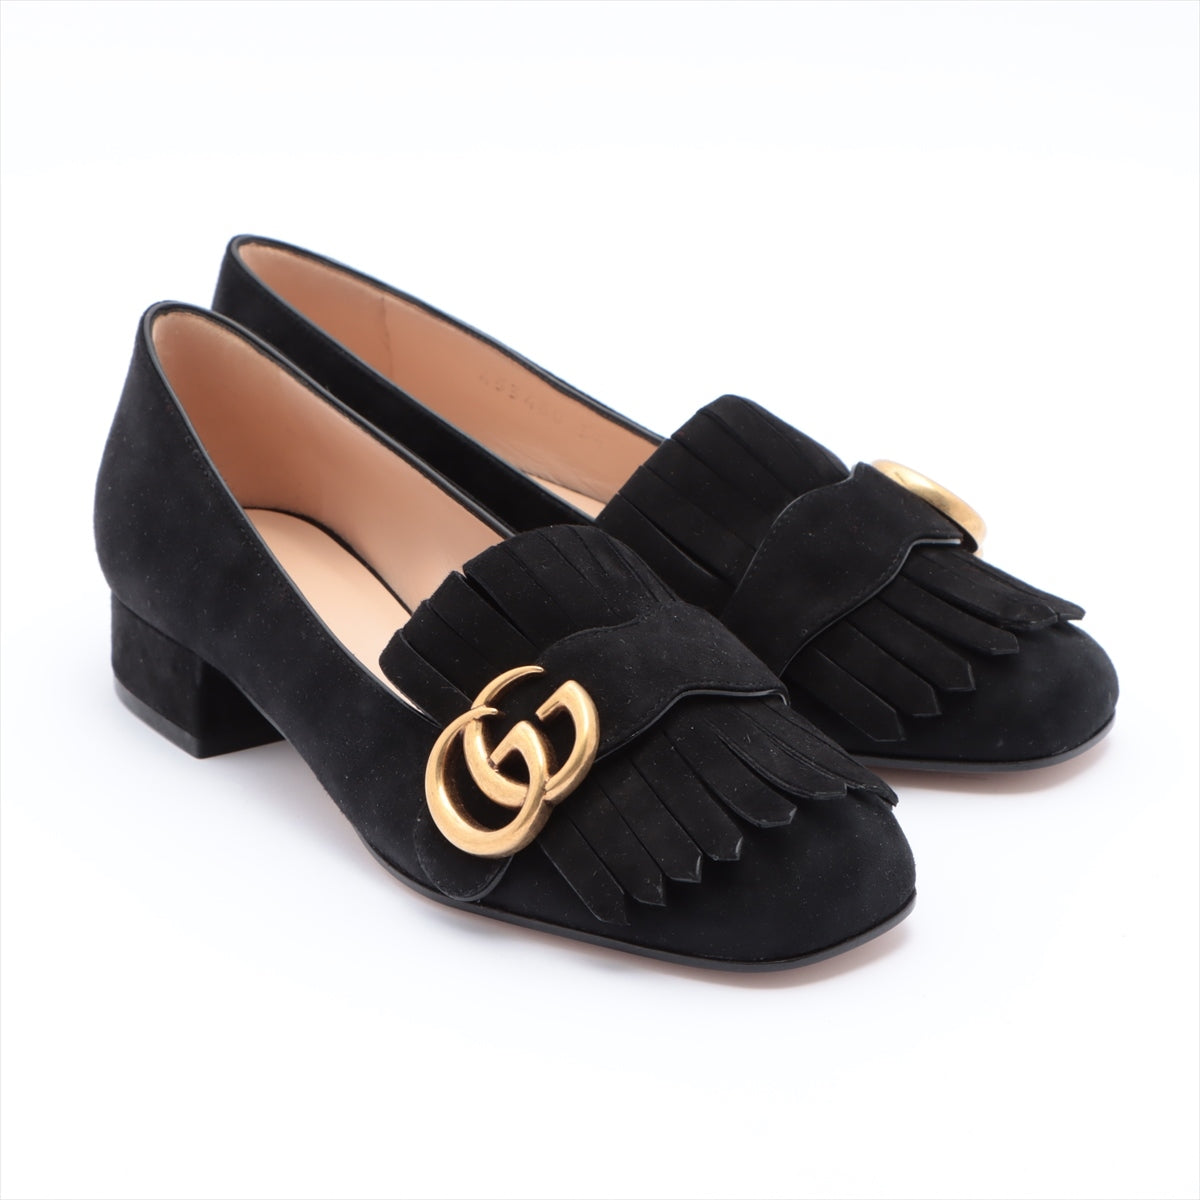 Gucci GG Marmont Suede Loafer 34 Ladies' Black 453480